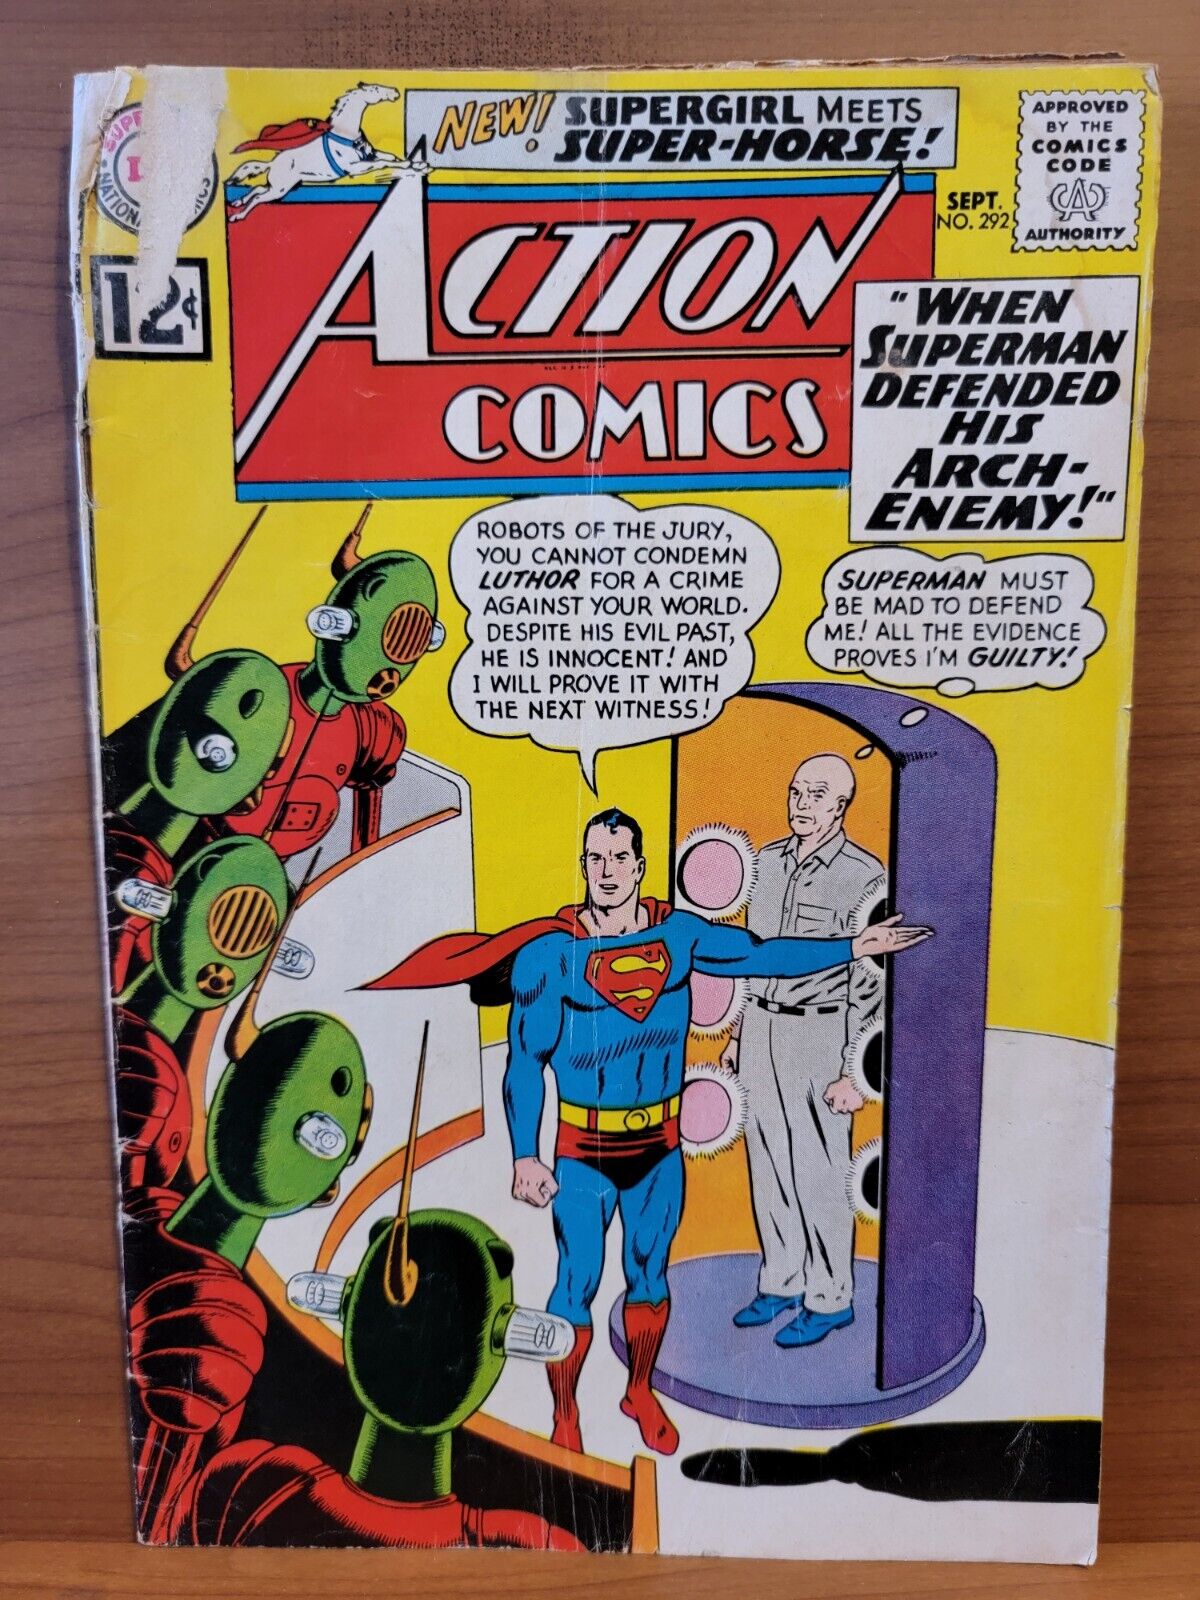 Action Comics #292 GD DC 1962 When Superman Defended his Arch Enemy